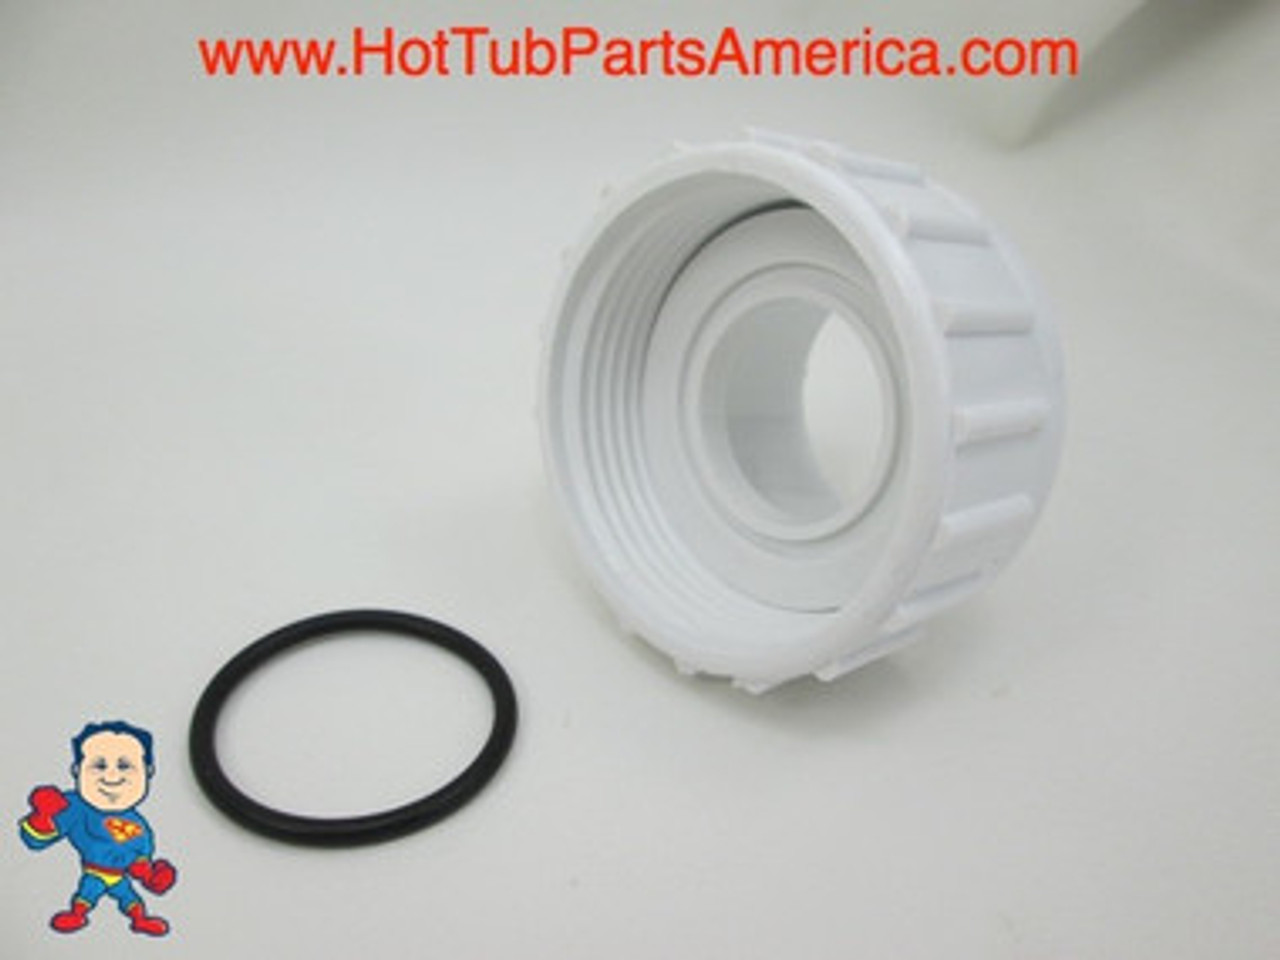 Set of 2 Hot Tub Spa 1" X 1" Slip Pump Union O-Ring Use Tiny Might other Video